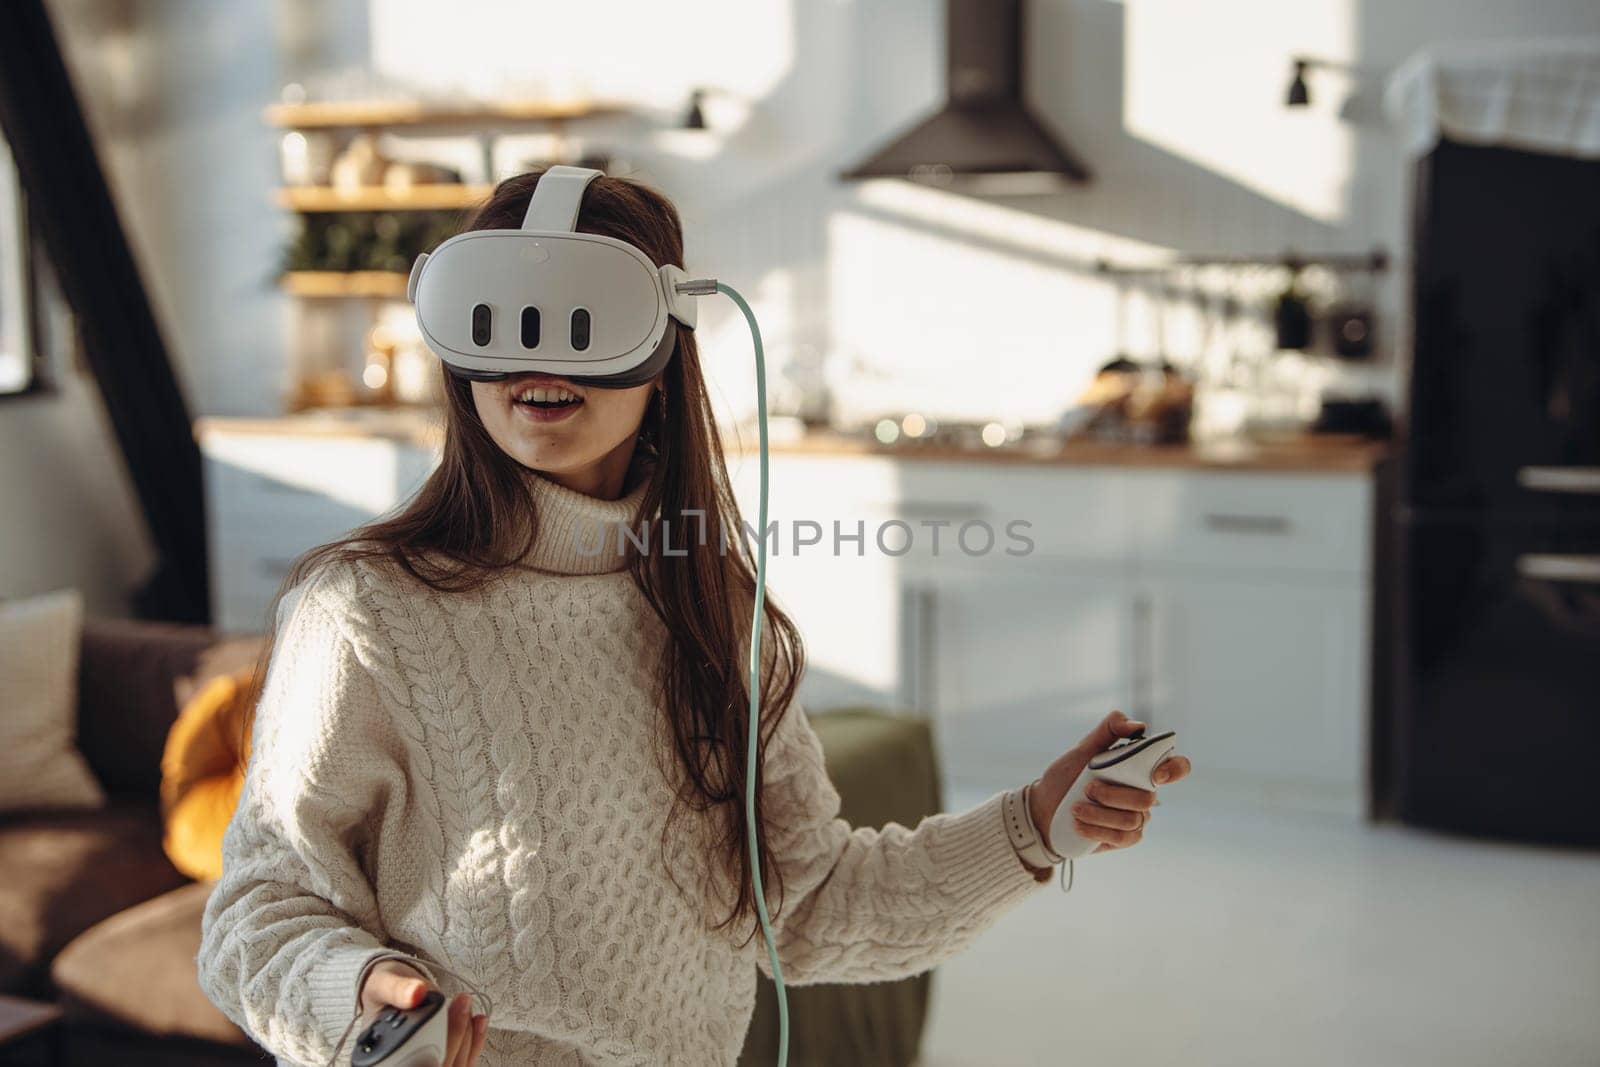 In a sunny ambiance, a lively young girl uses a virtual reality headset. by teksomolika